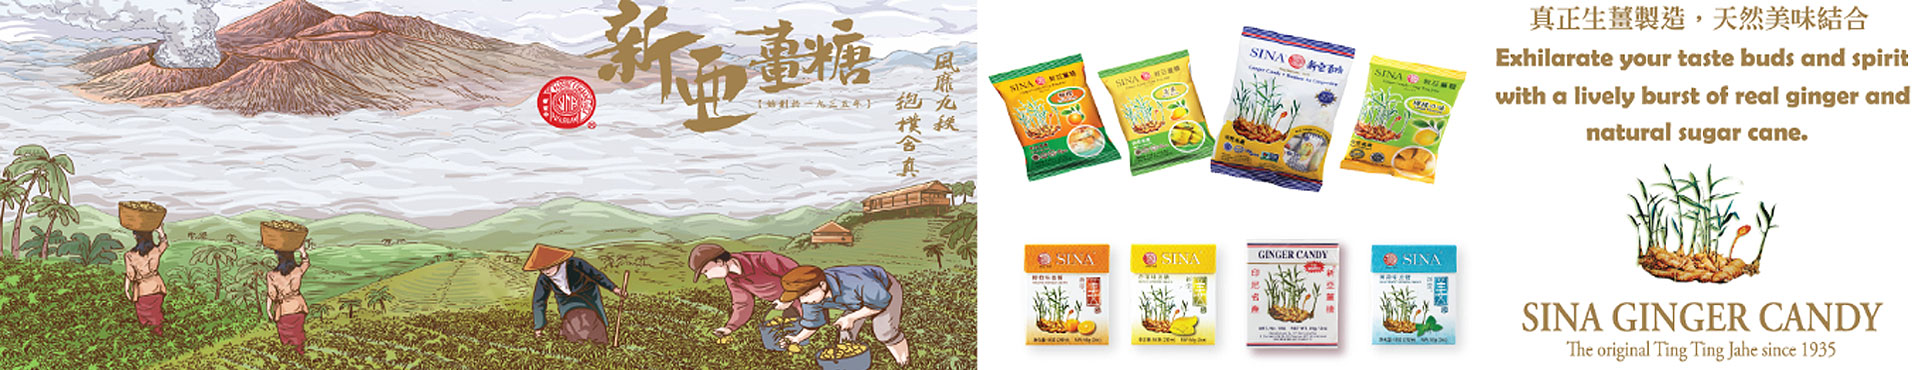 an array of images of Sina Gourmet Ginger Candy, Chimes Garden Products, and Canola Olive oil products